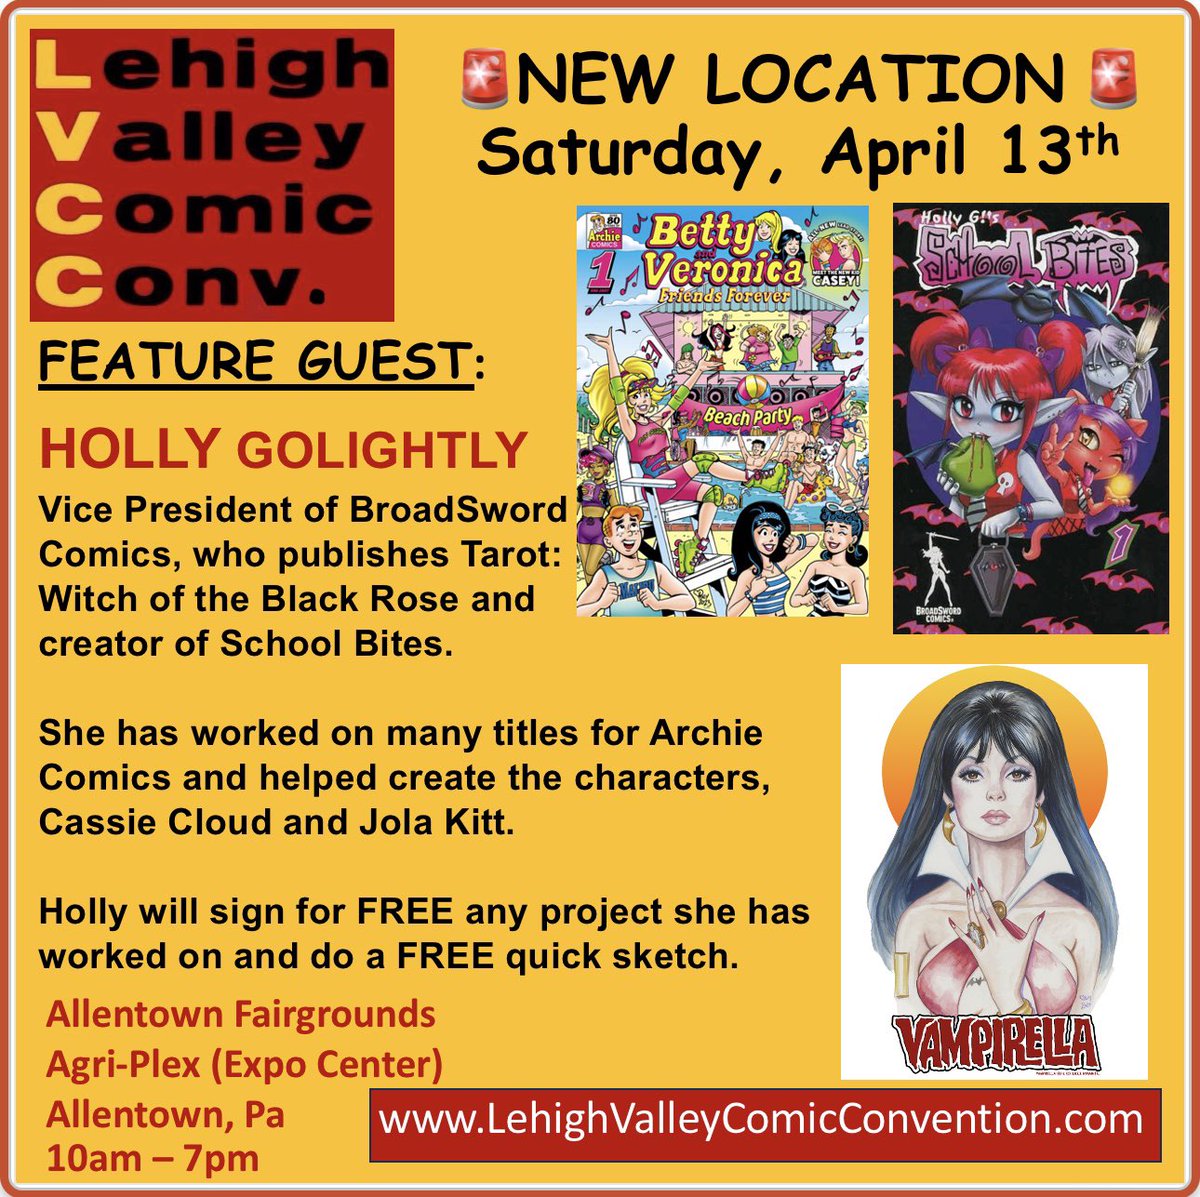 Sat 4/13 Guest - HOLLY GOLIGHTLY will sign for FREE any project she has worked on & do a FREE quick sketch. Details @ LehighValleyComicConvention.com @ComicBook @TheCBCL @ericwhiteback #archie #ComicArt #comicartist #Collectibles #comicbook #comicbookart #comicbooks #Collector #comics